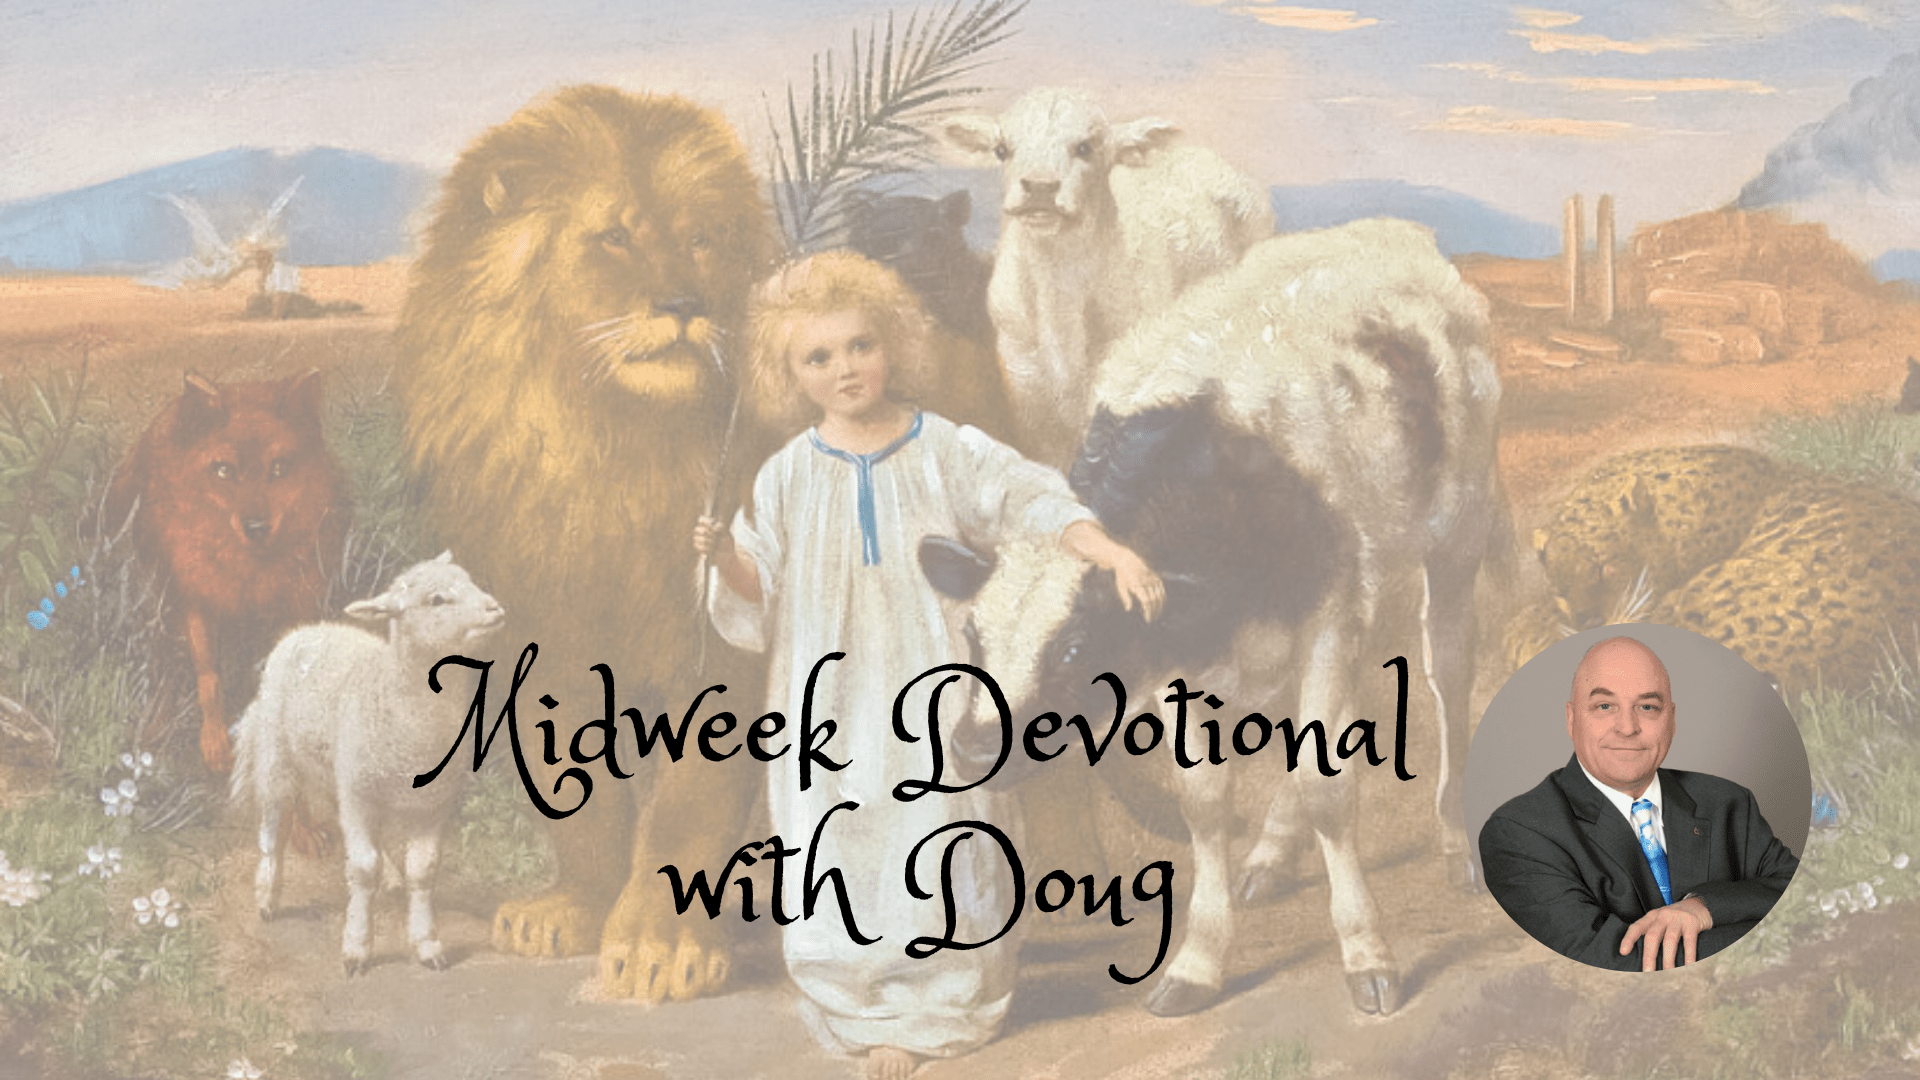 Midweek Devotional with Doug for second week of October